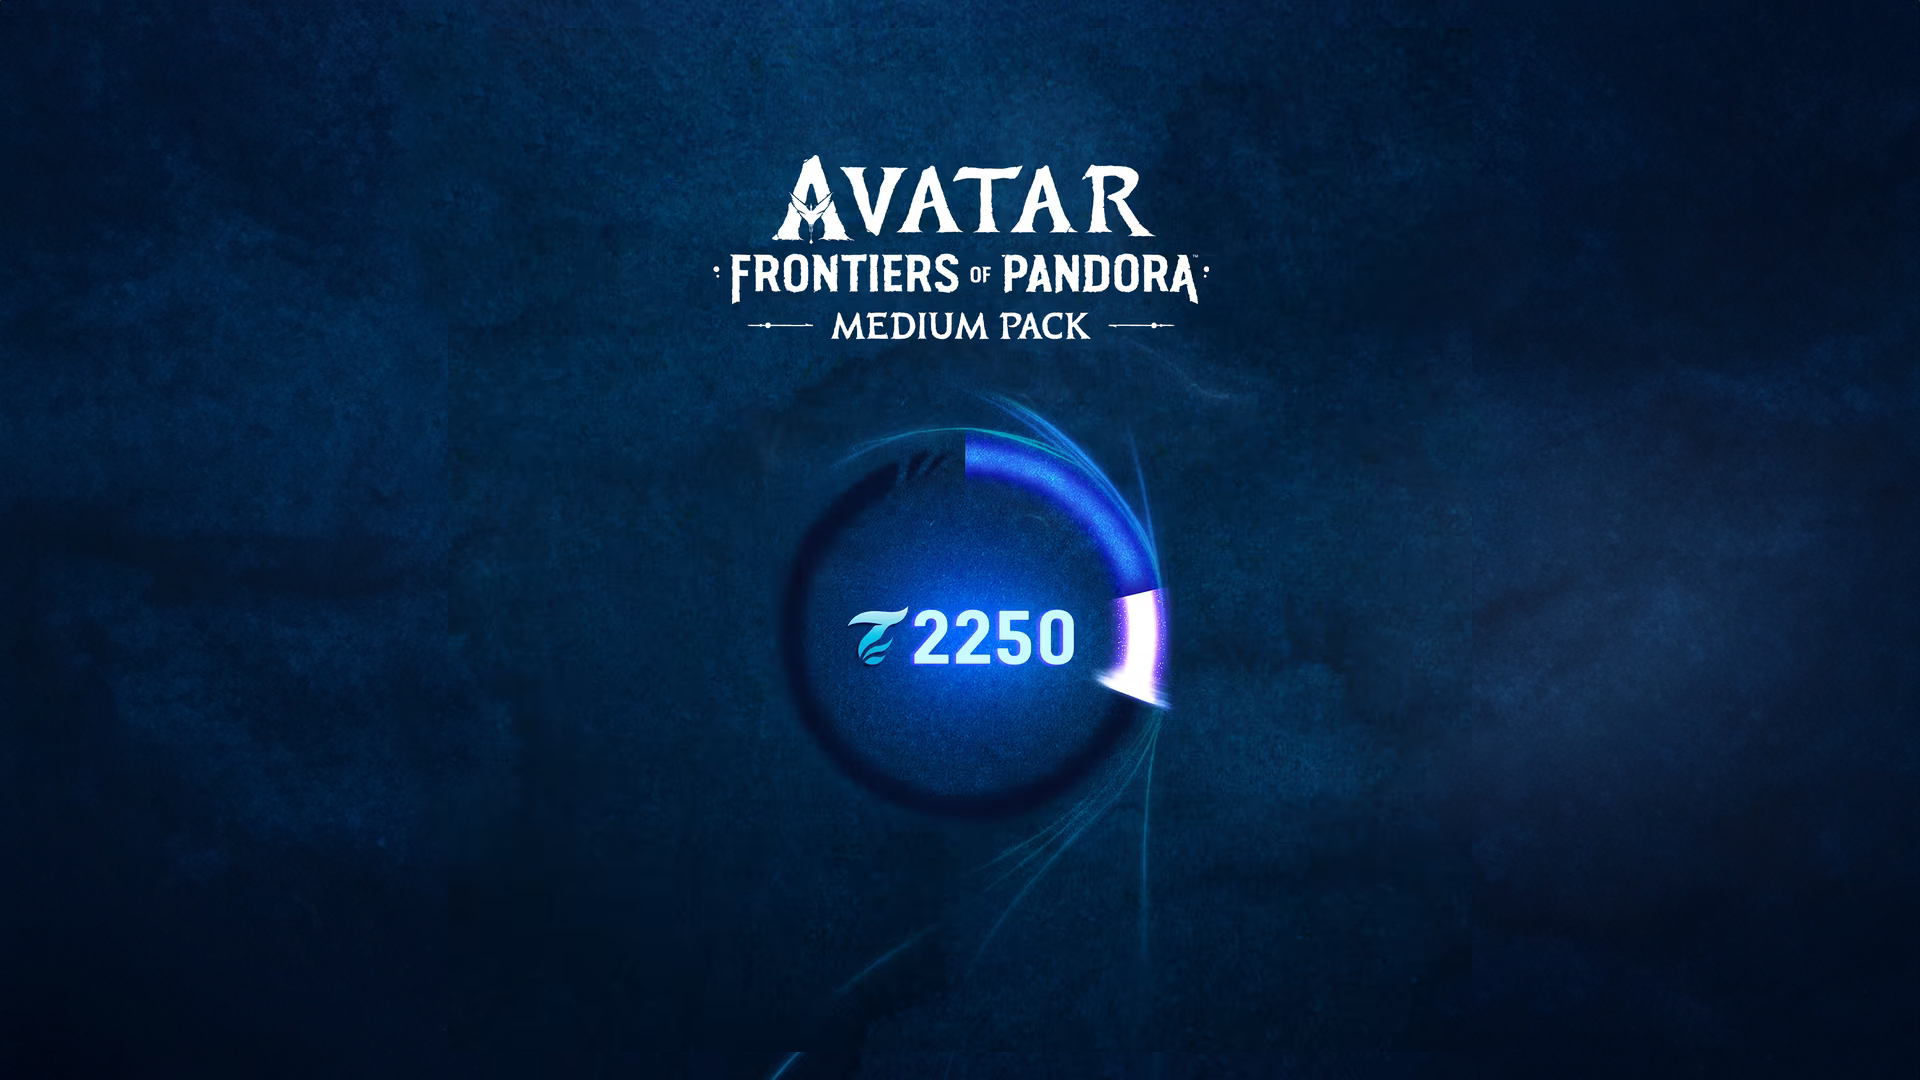 Avatar: Frontiers of Pandora - 2250 VC Pack Xbox Series X|S CD Key, 20.47 usd